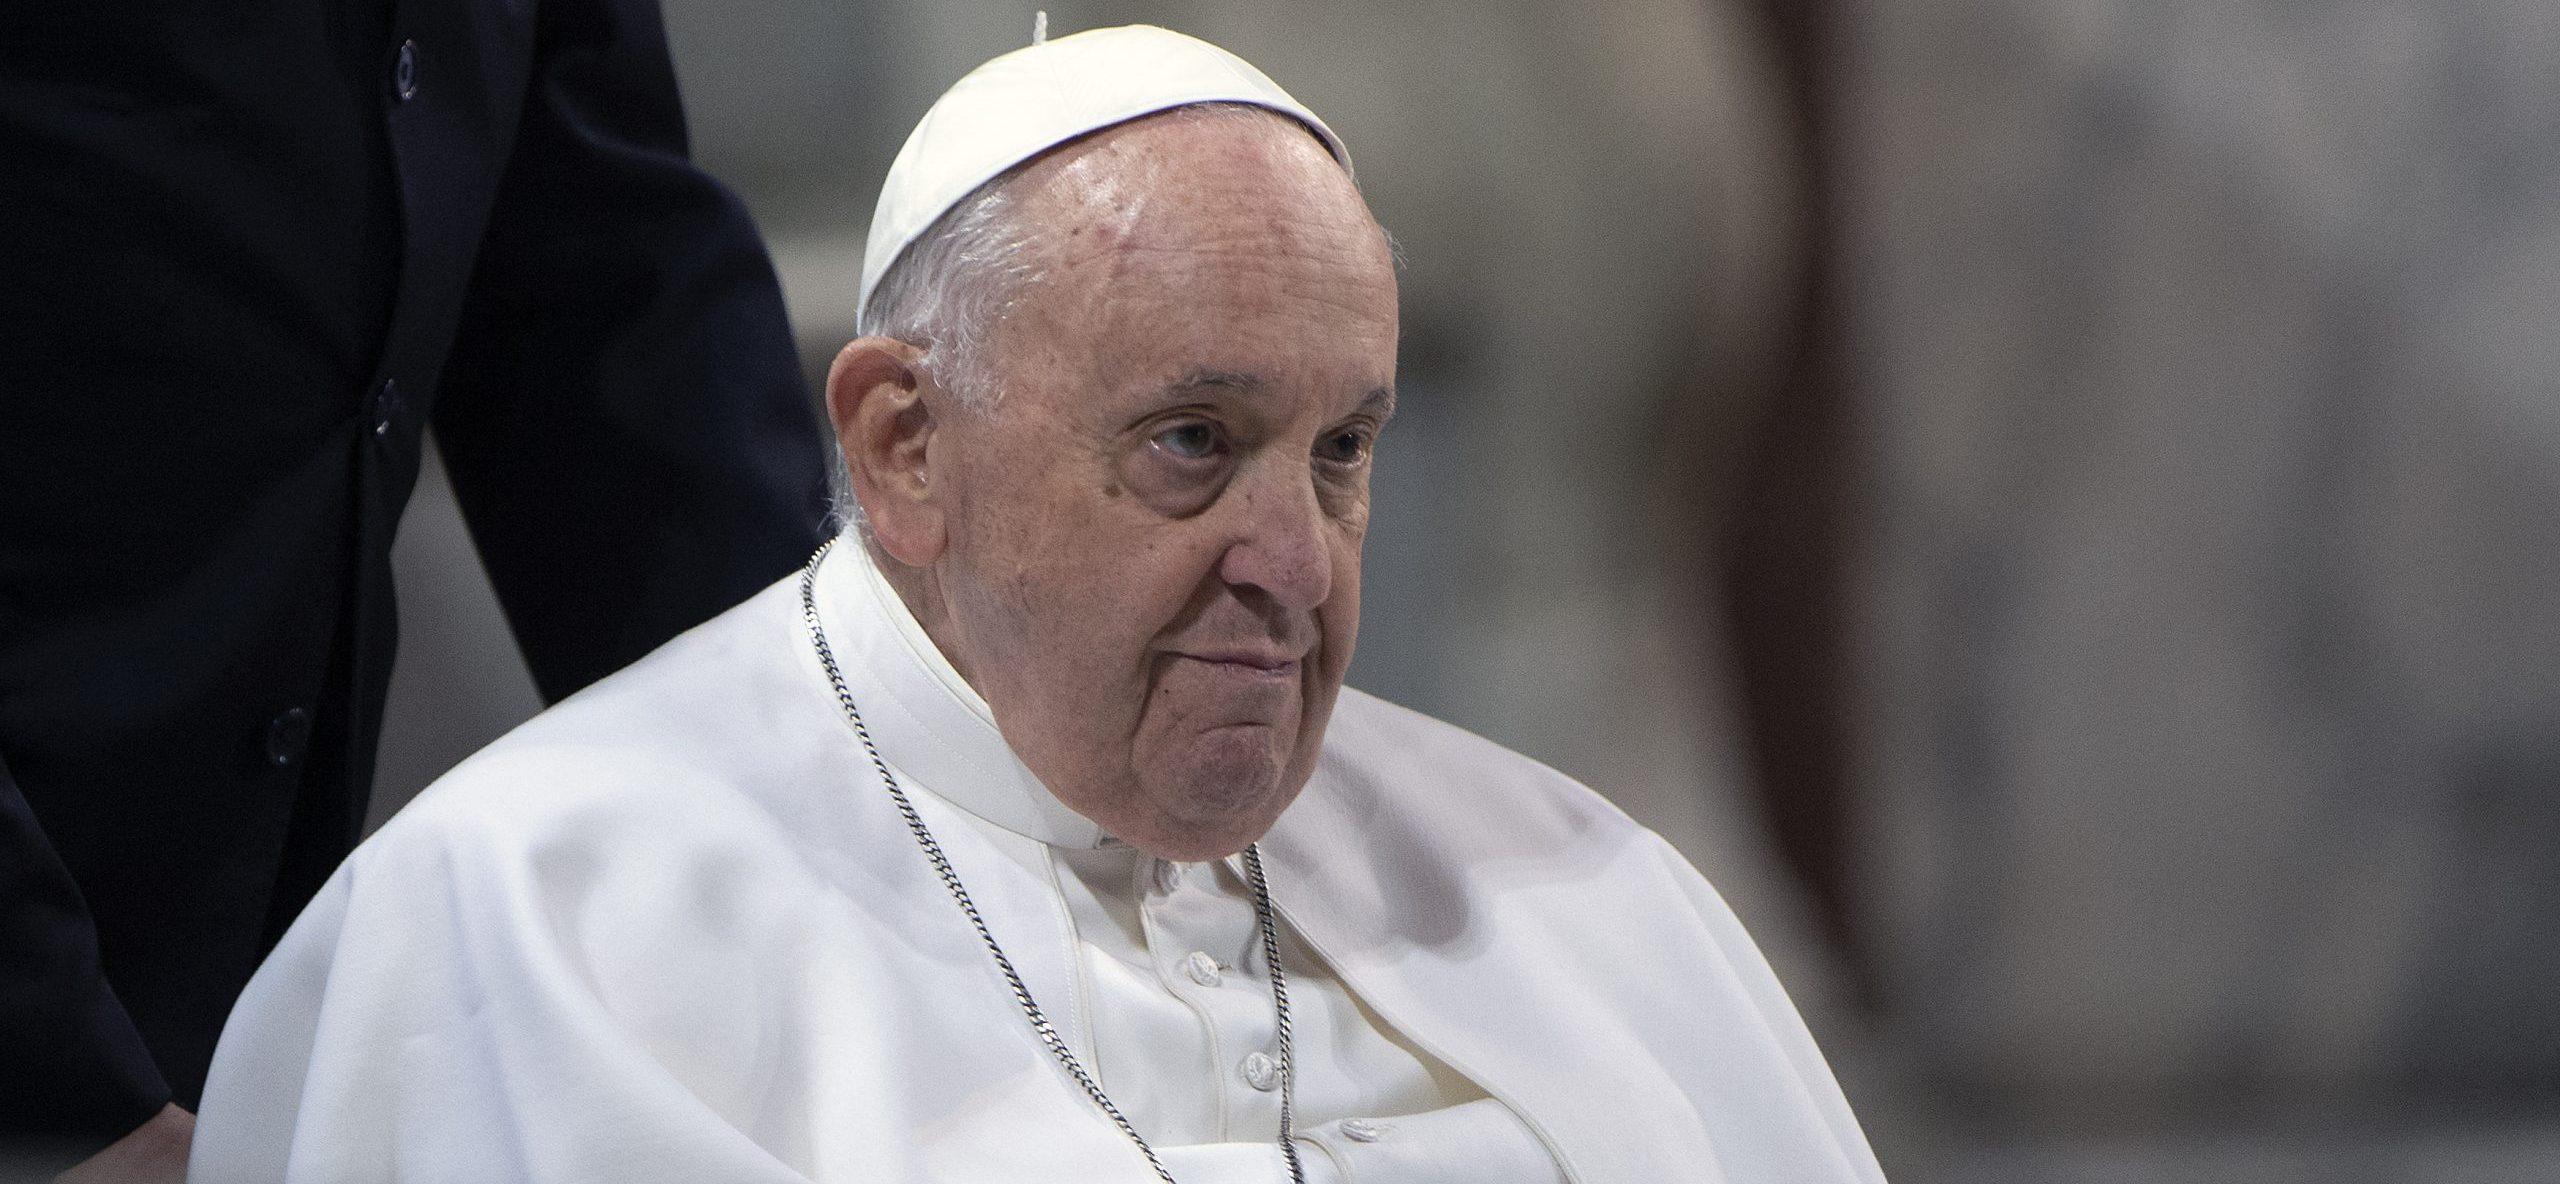 Pope Francis Hospitalized After Being Diagnosed With A Respiratory Infection